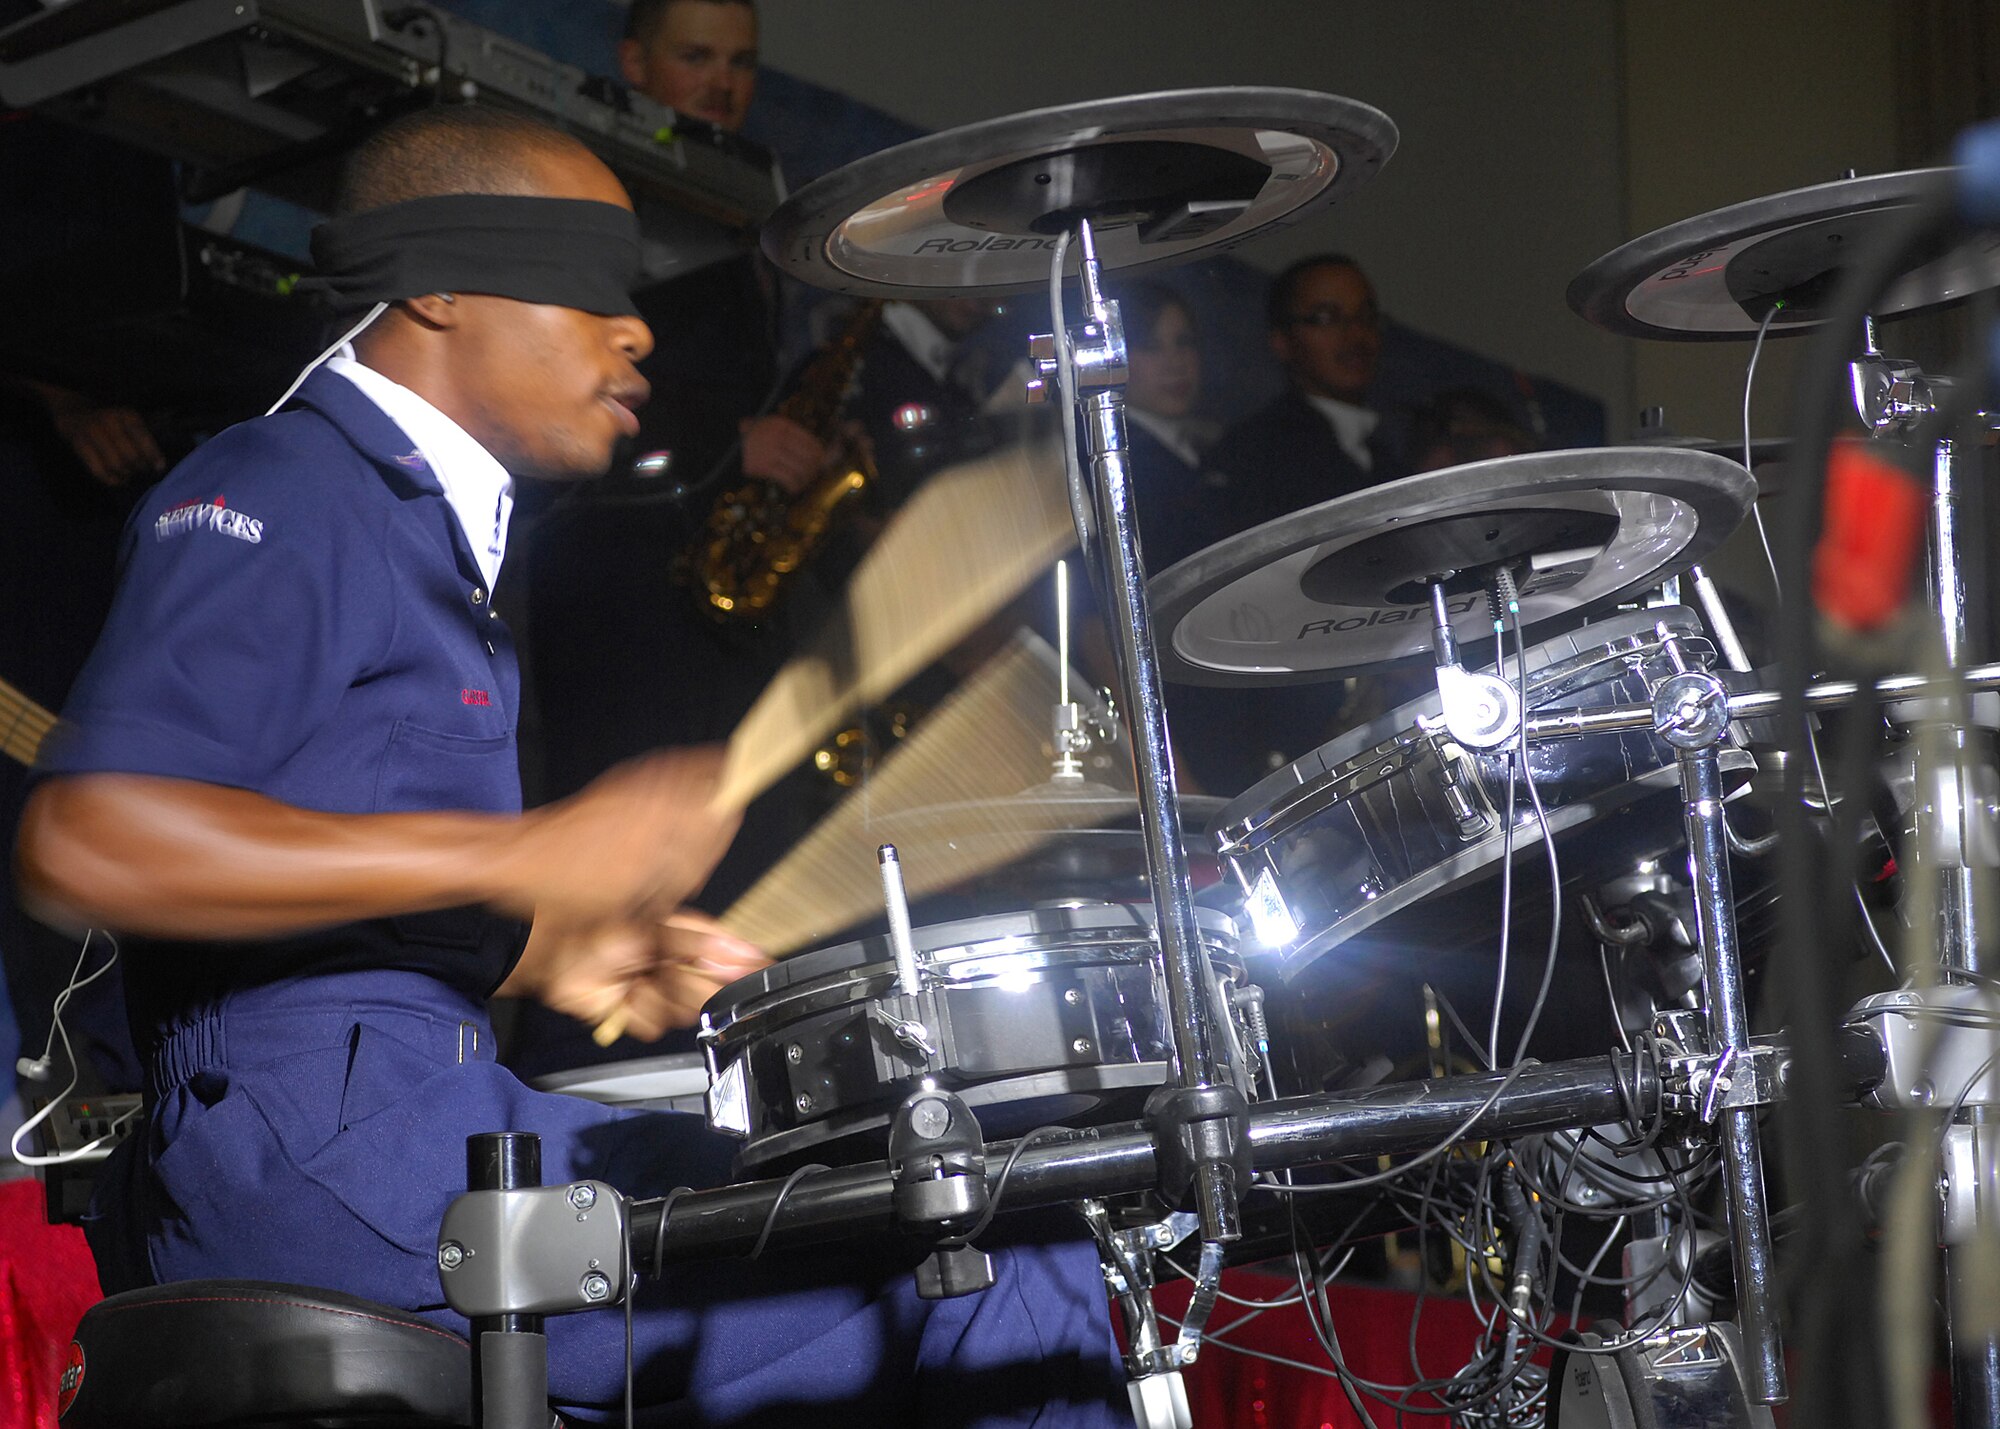 SOUTHWEST ASIA -- Airman 1st Class Christopher Gadson, a Tops in Blue performer, displays incredible techniques during a drum solo at a performance on July 24 at a base in Southwest Asia. Tops in Blue are the Air Force's premier entertainment group that performs for audiences around the globe. (U.S. Air Force photo by Tech. Sgt. Raheem Moore)   